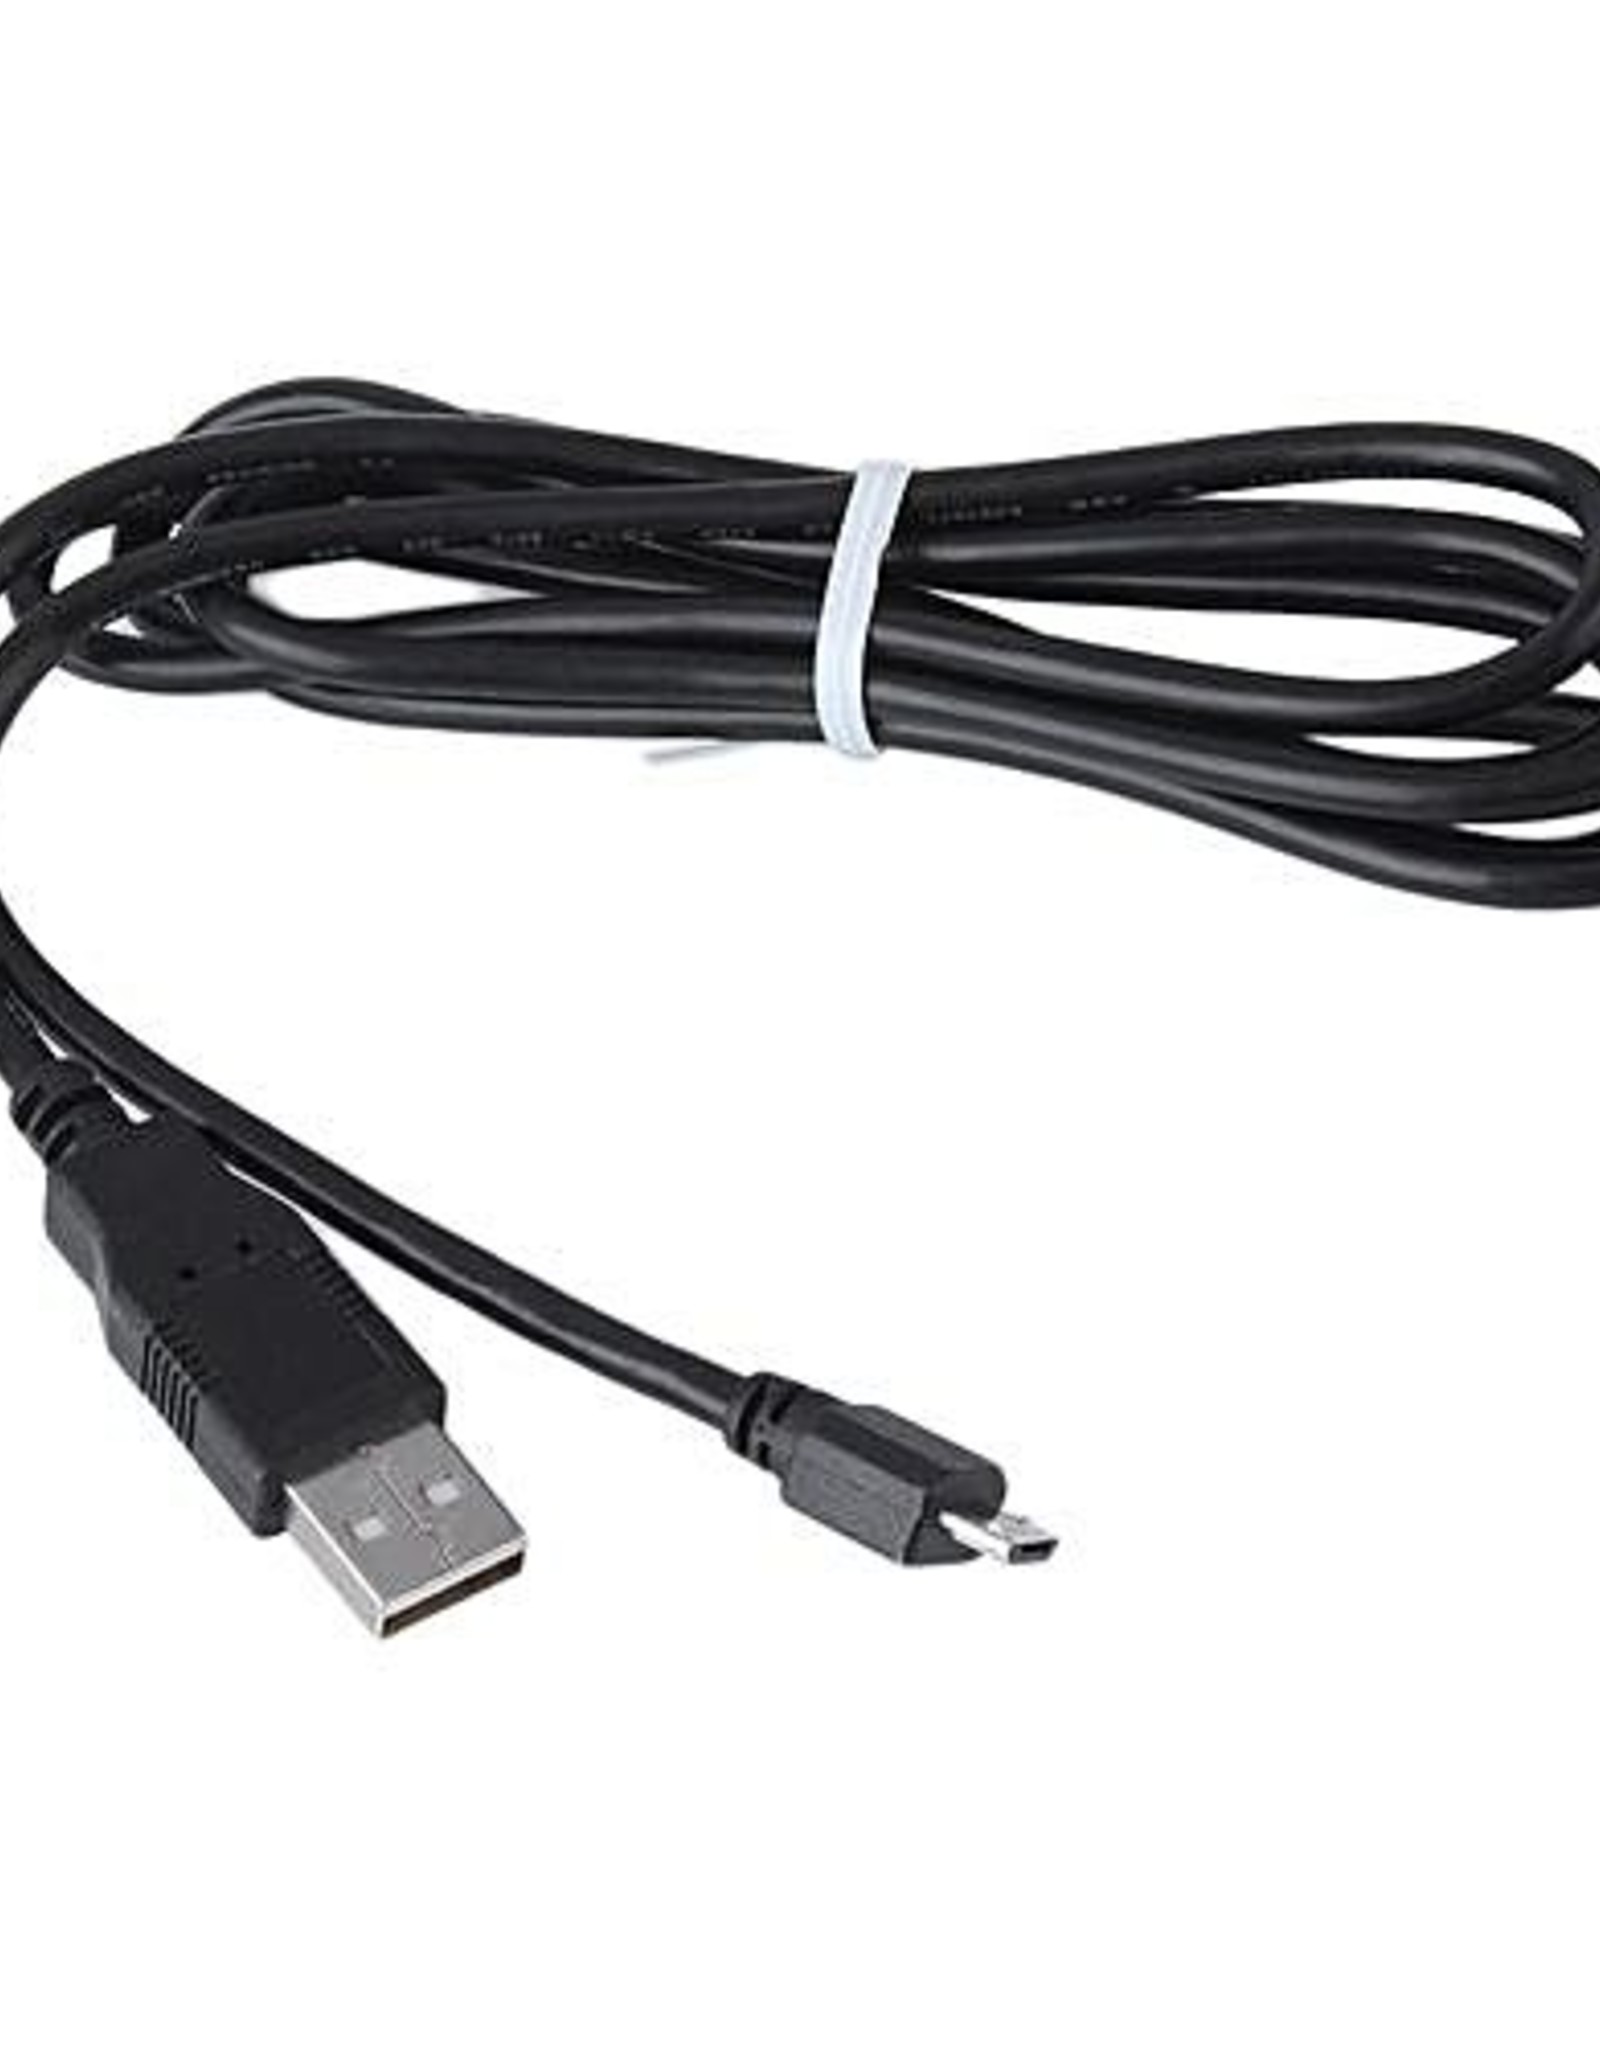 ps4 controller charger cable